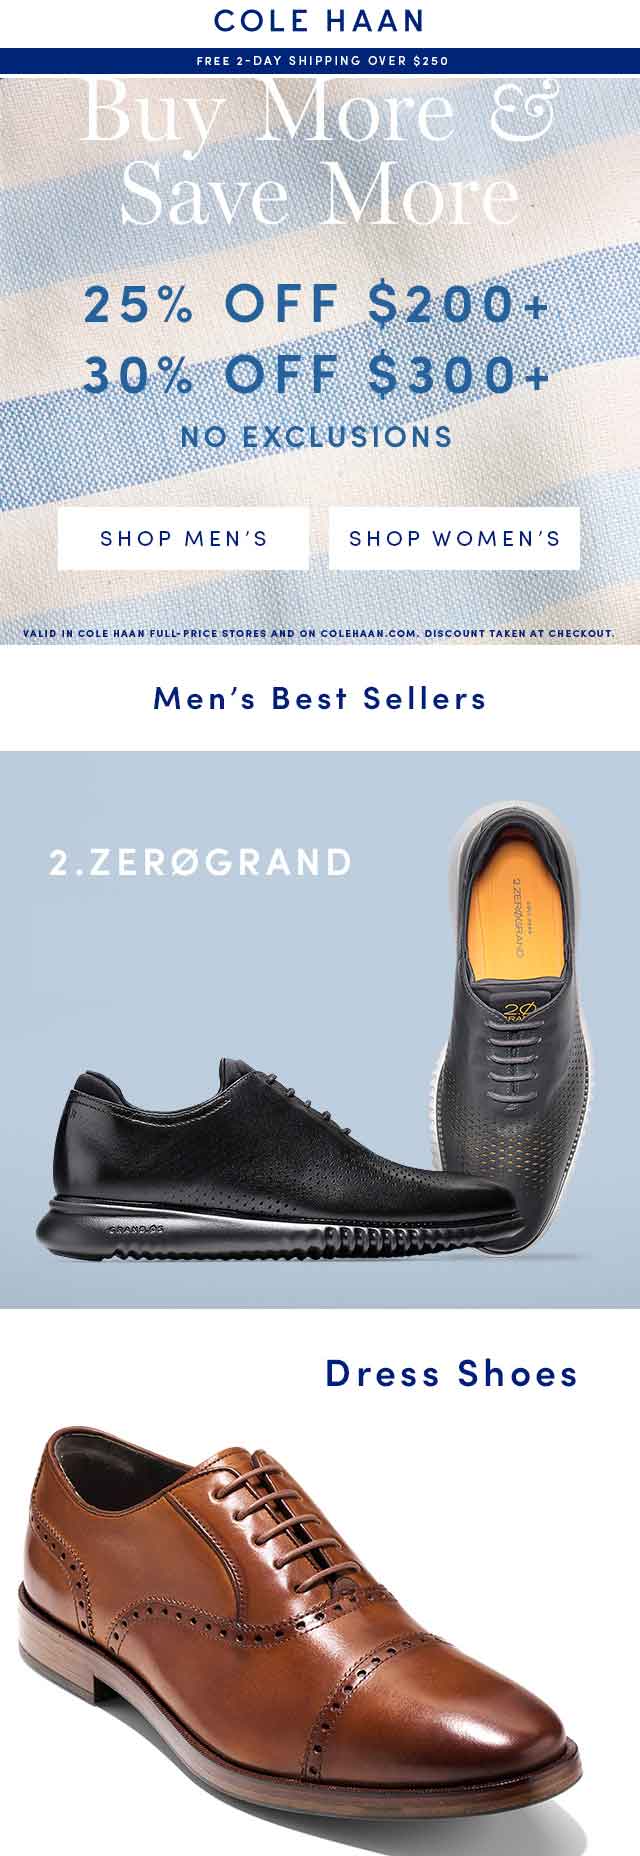 Cole Haan November 2020 Coupons and 